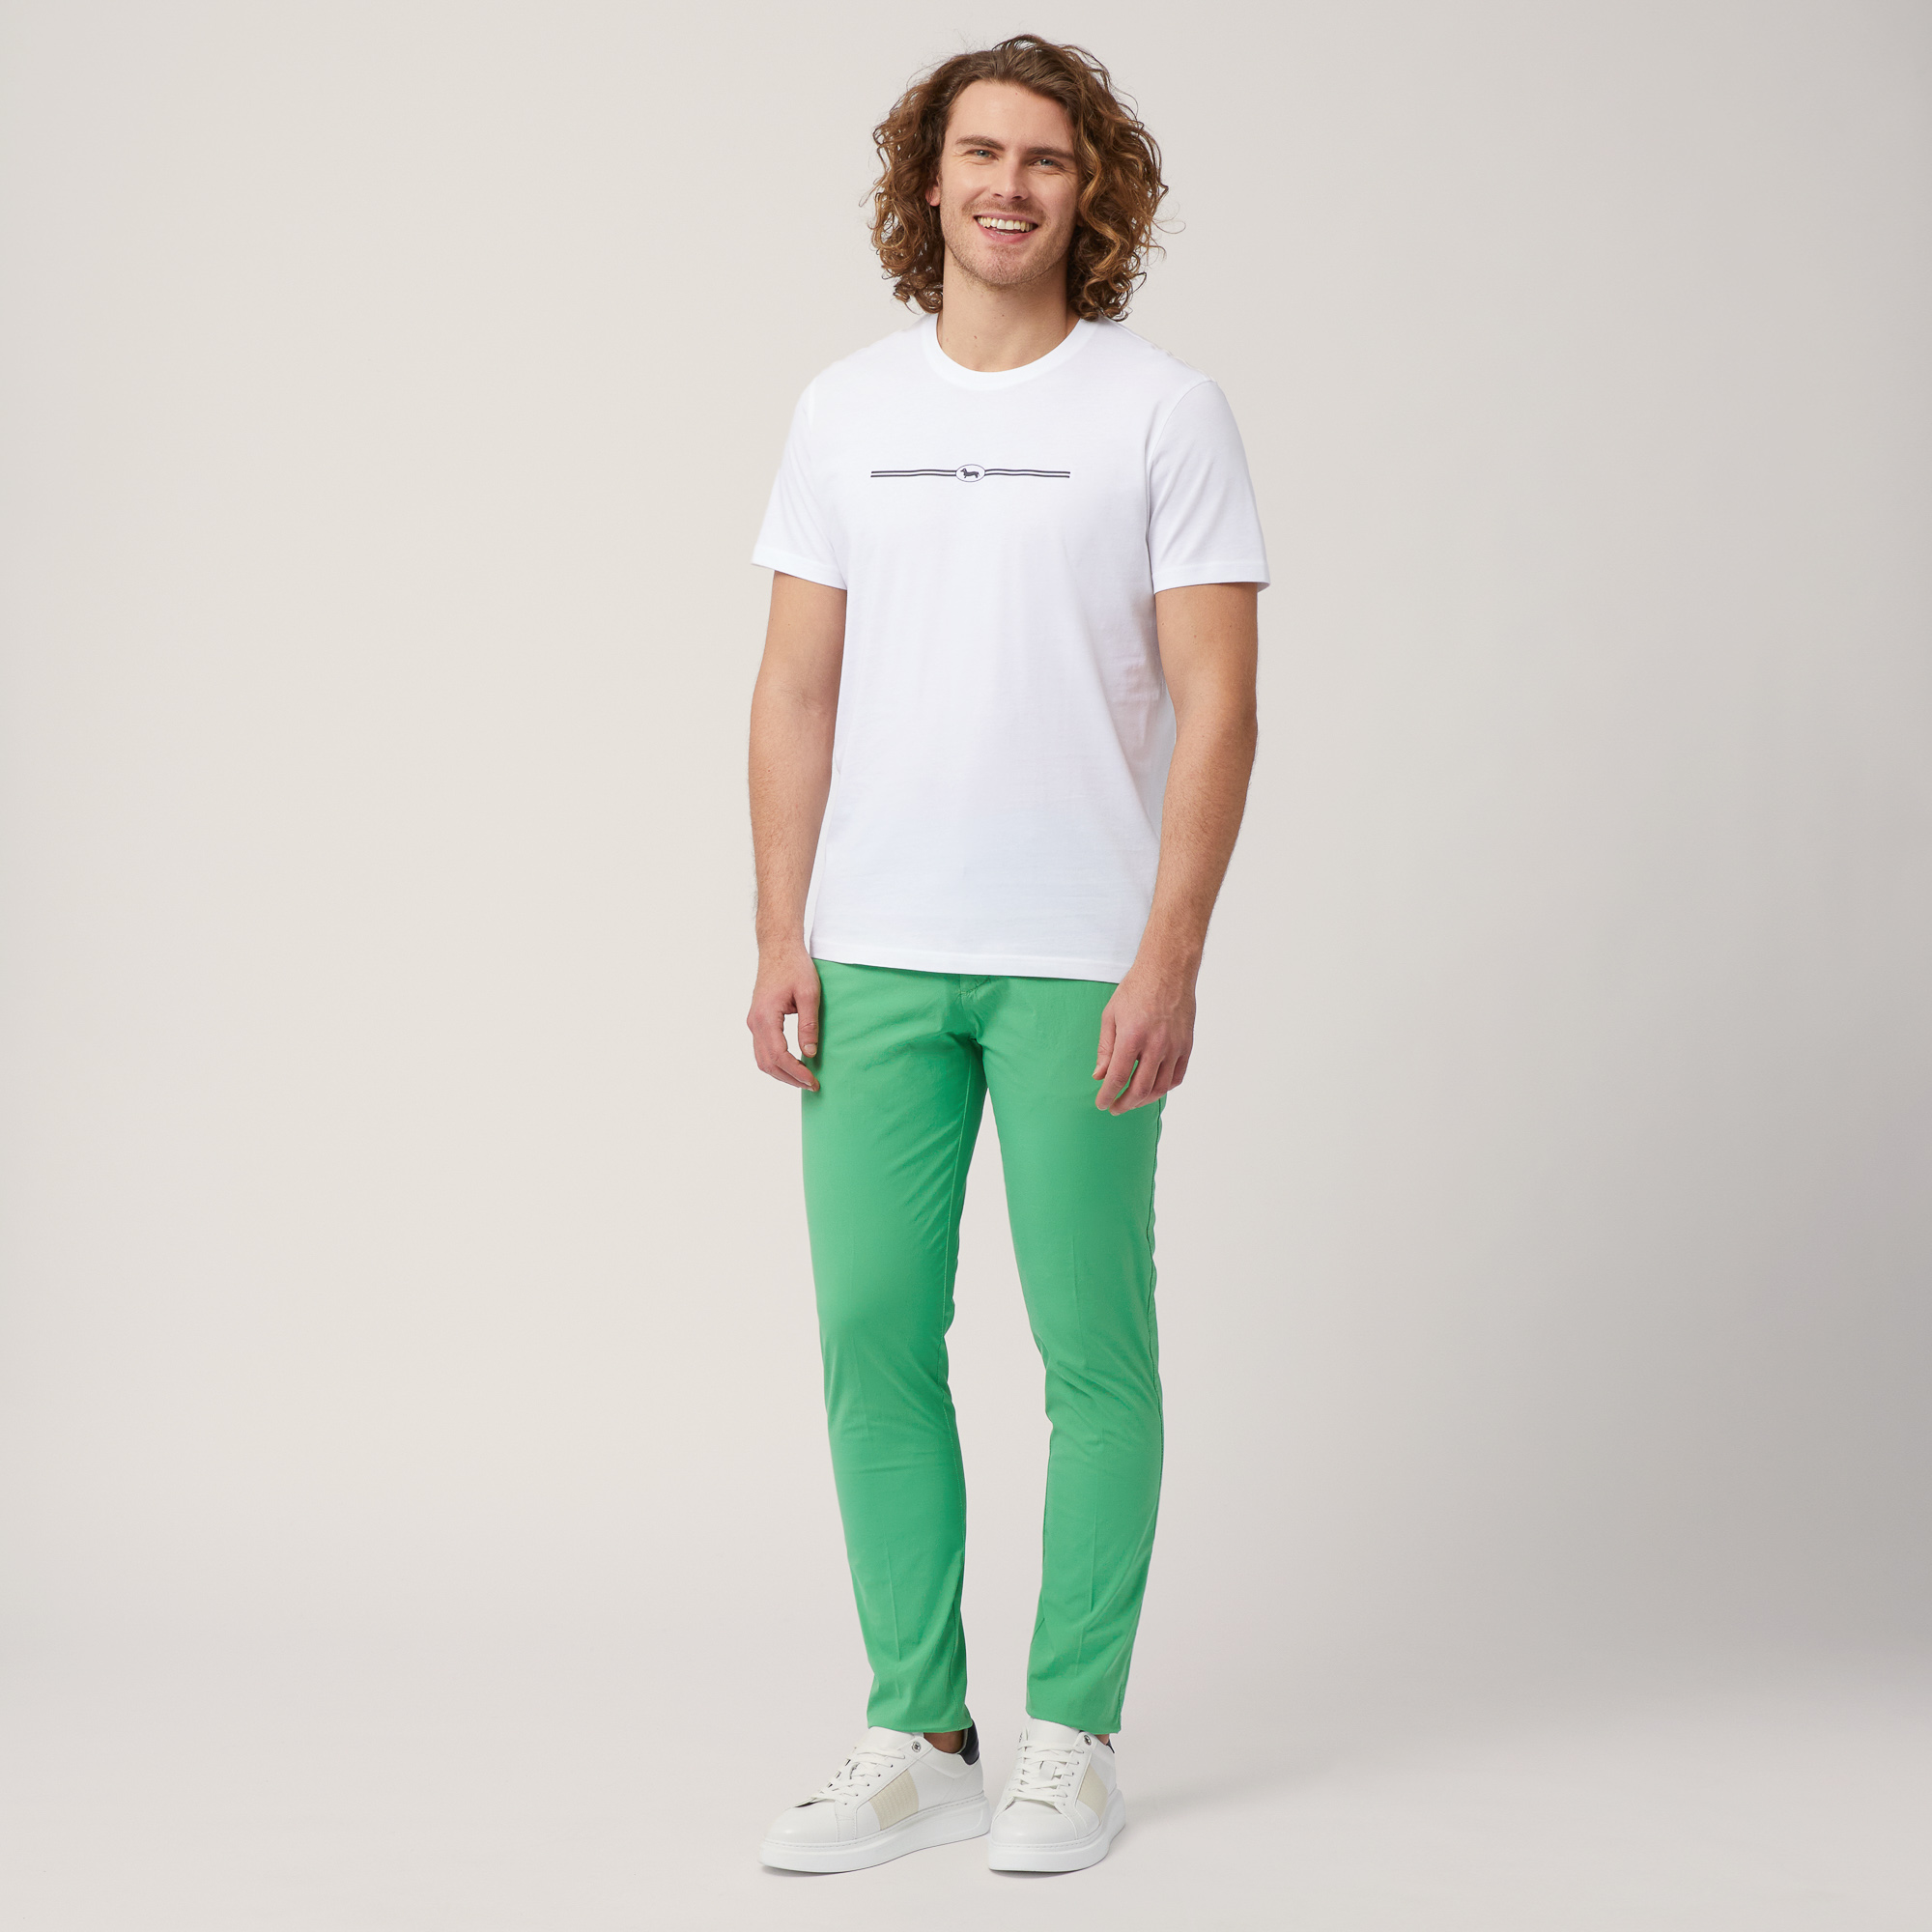 Narrow Fit Chino Pants, Herb, large image number 3